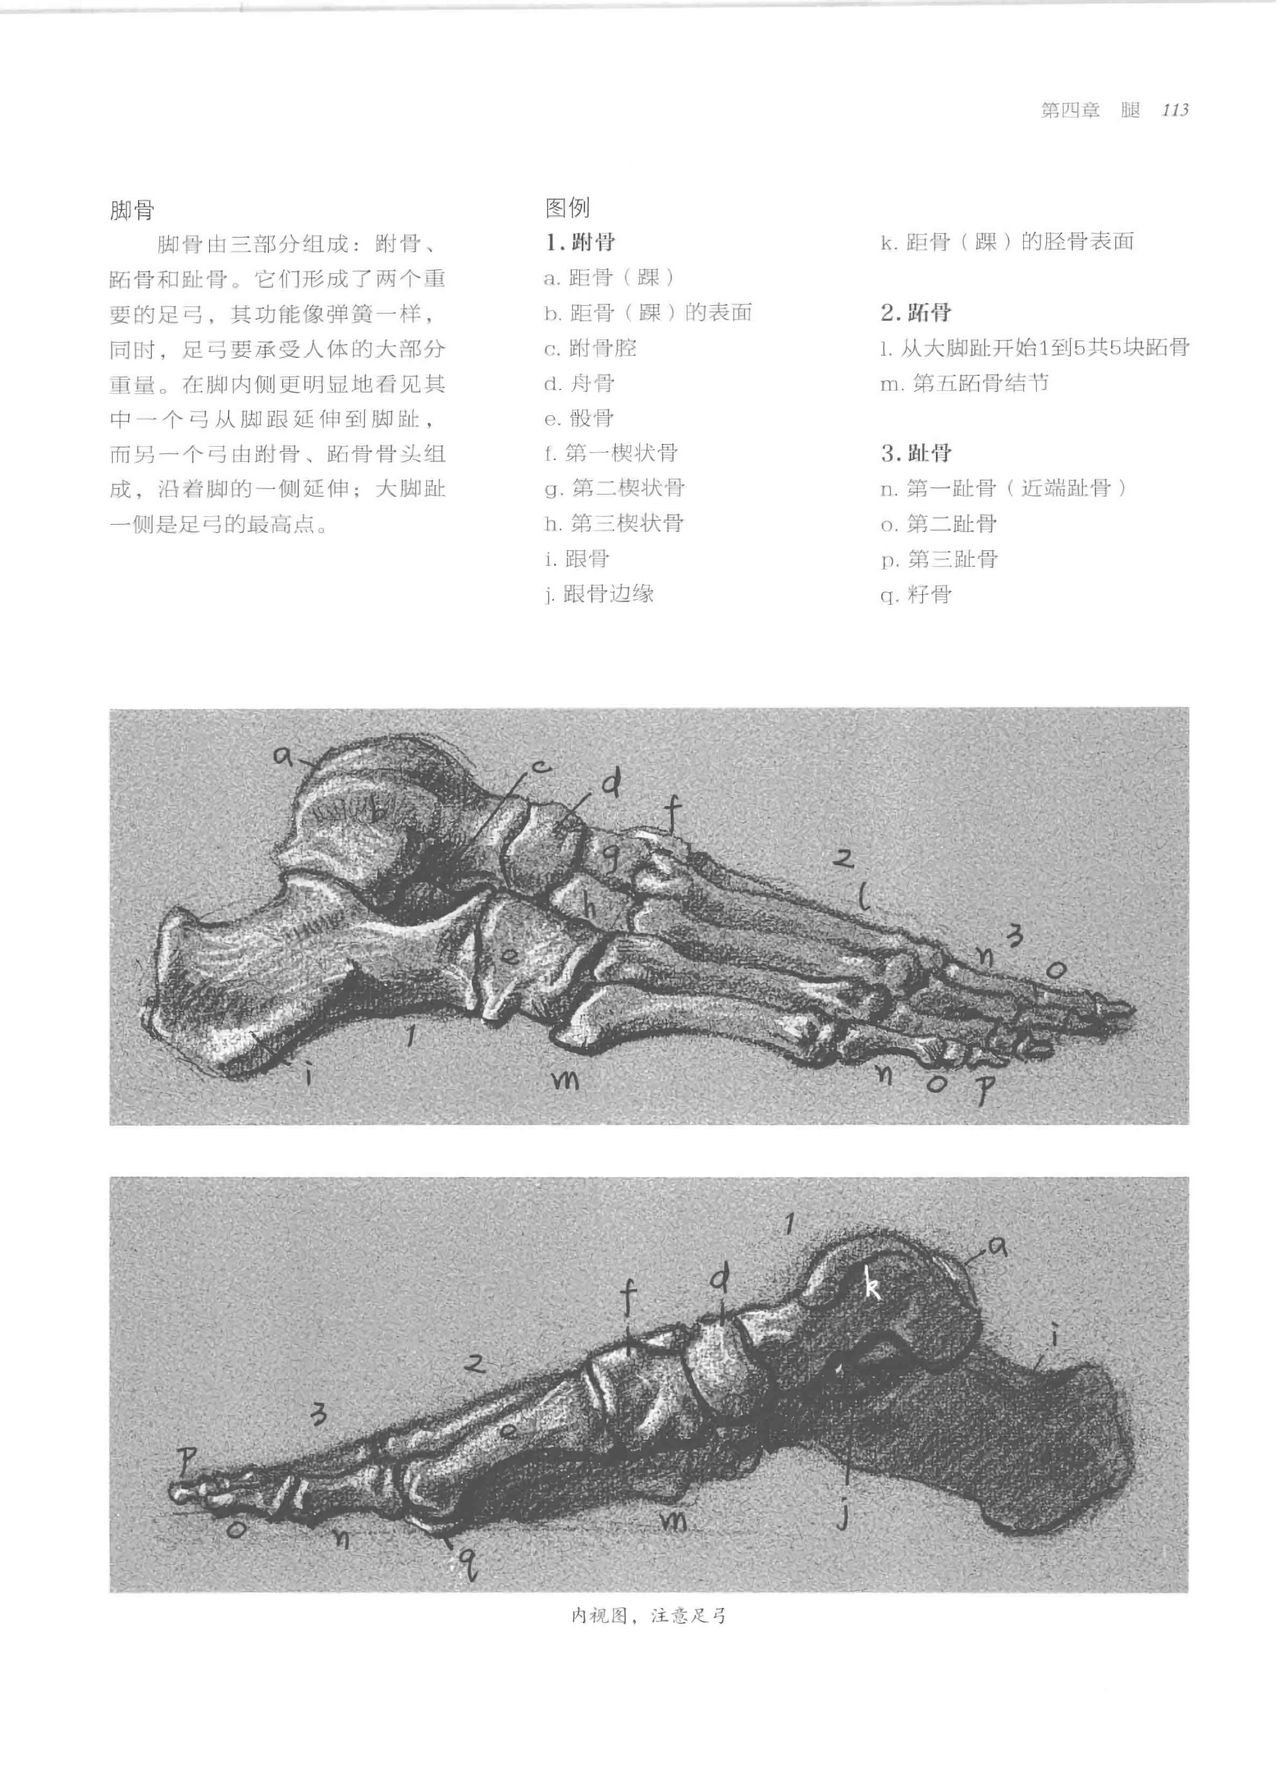 Anatomy-A Complete Guide for Artists - Joseph Sheppard [Chinese] 113